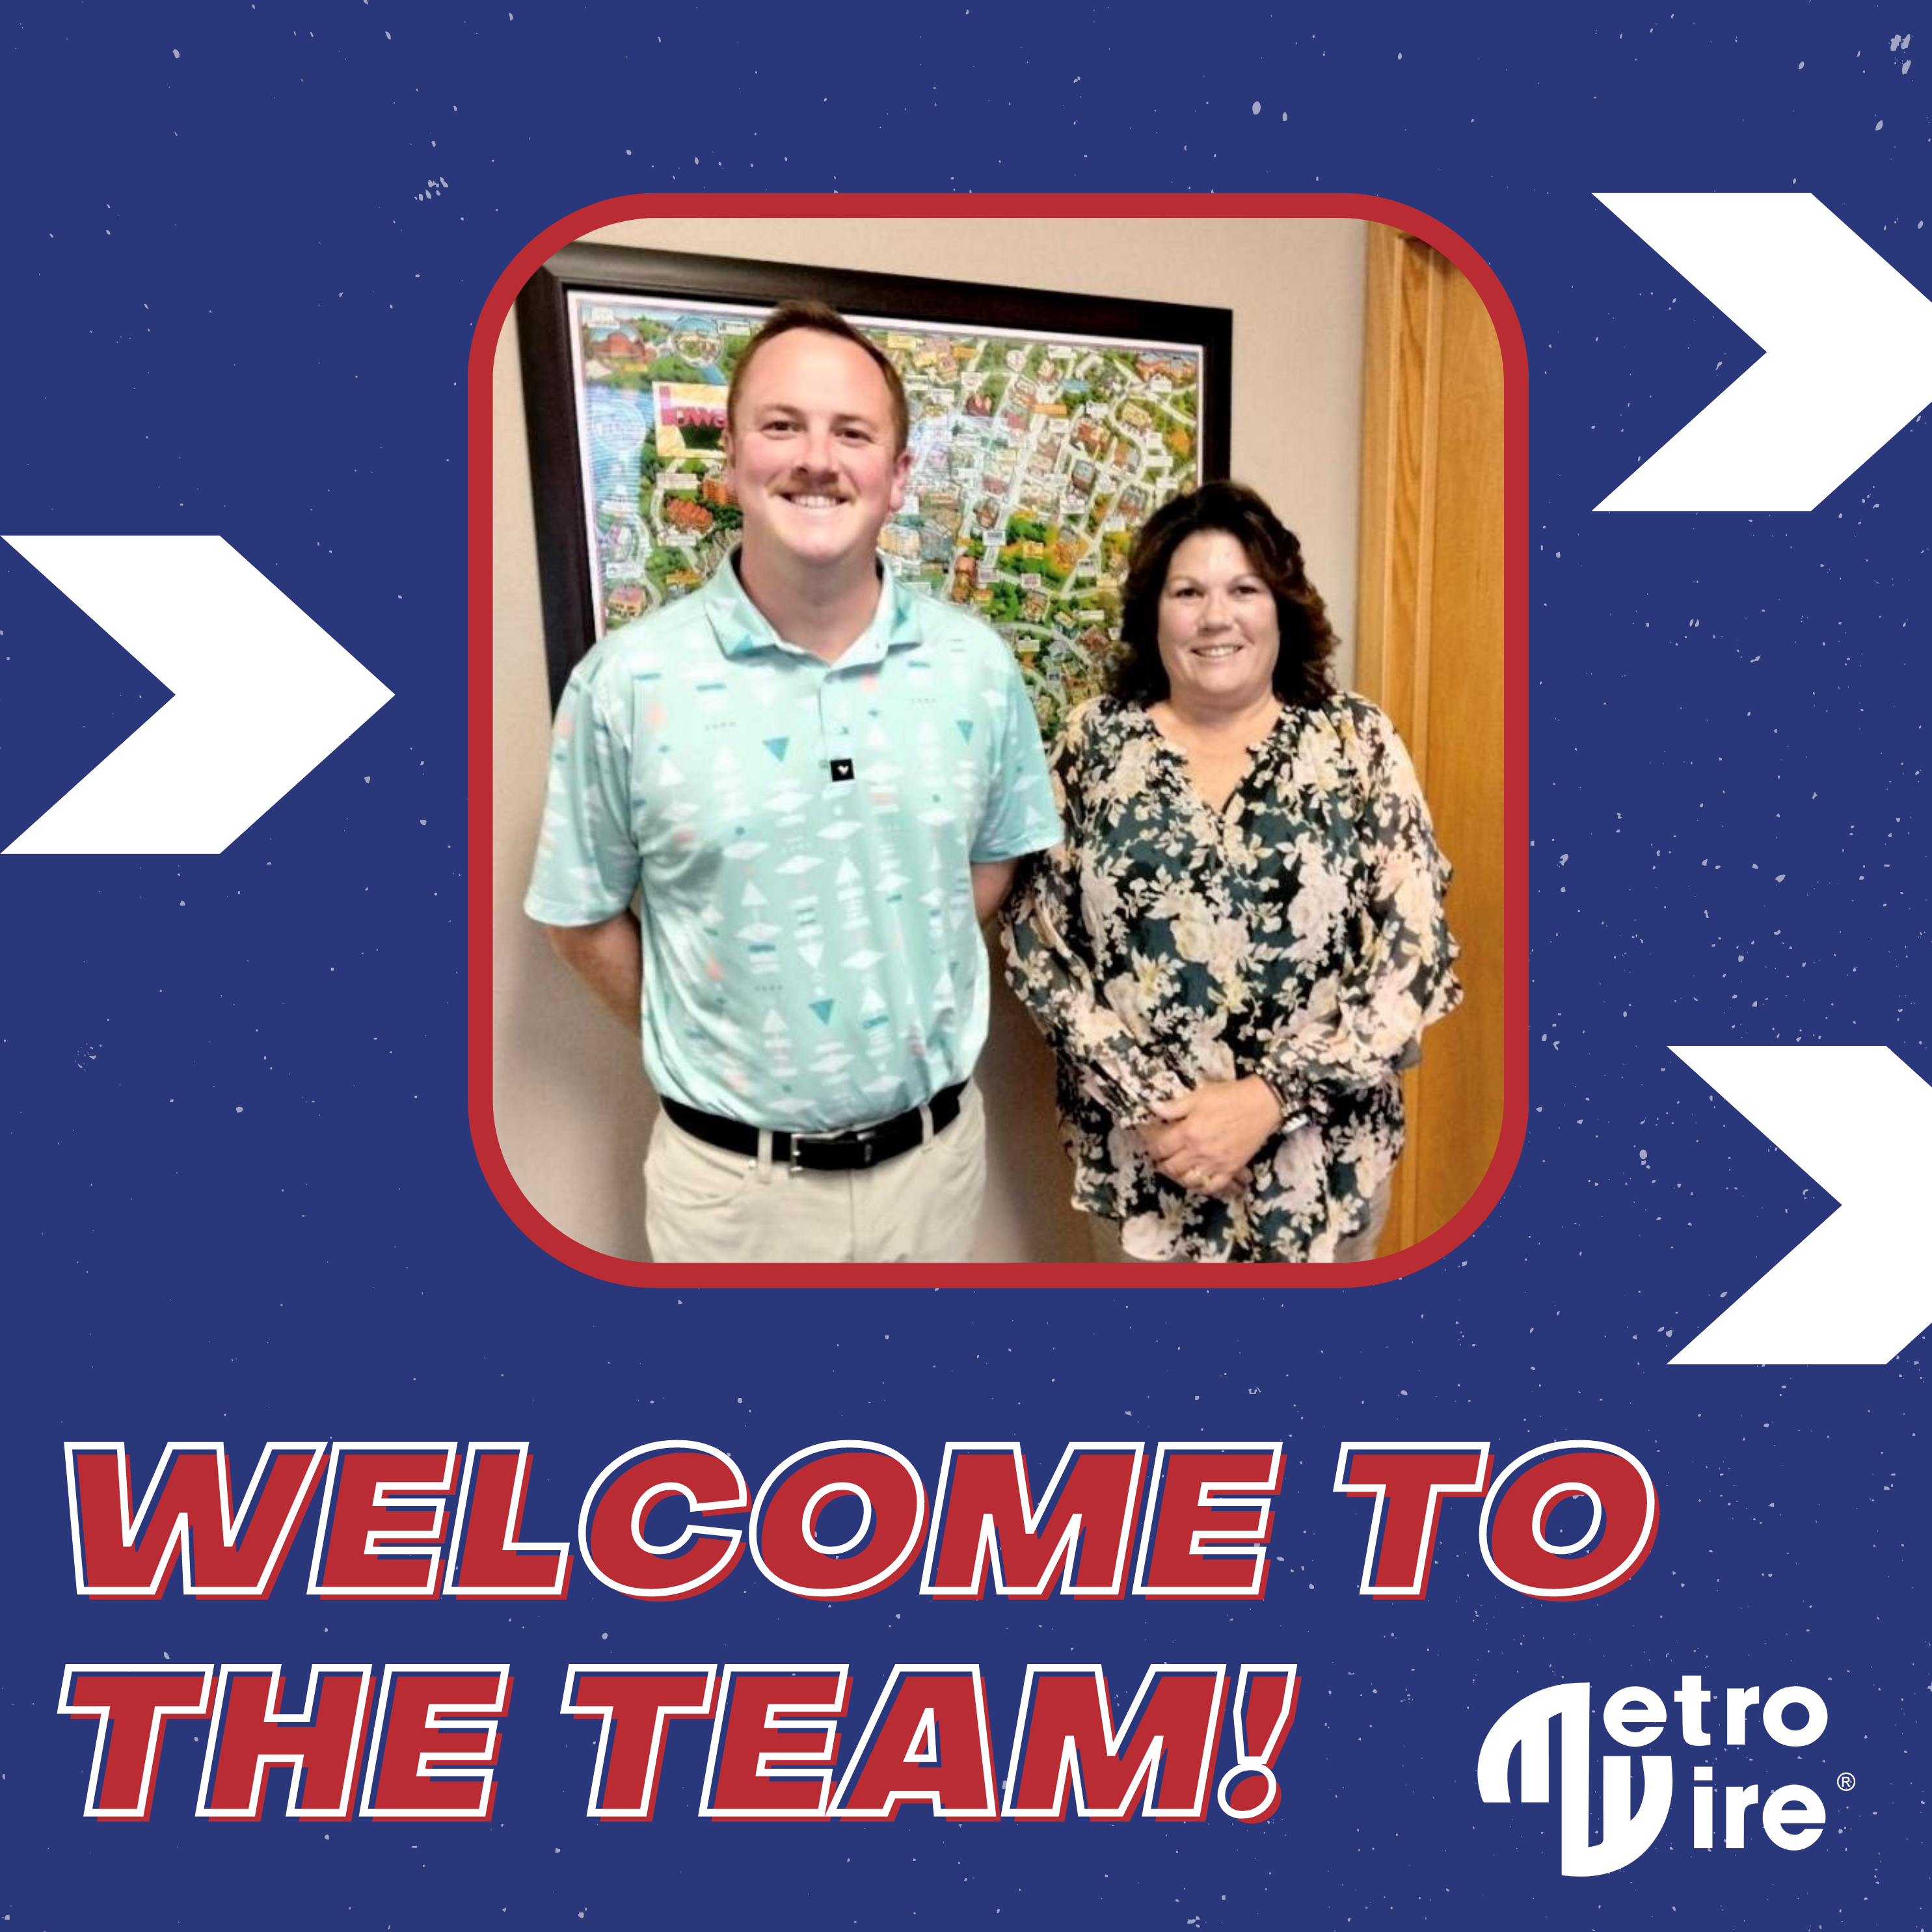 Welcome to the team, Clay and Michelle!